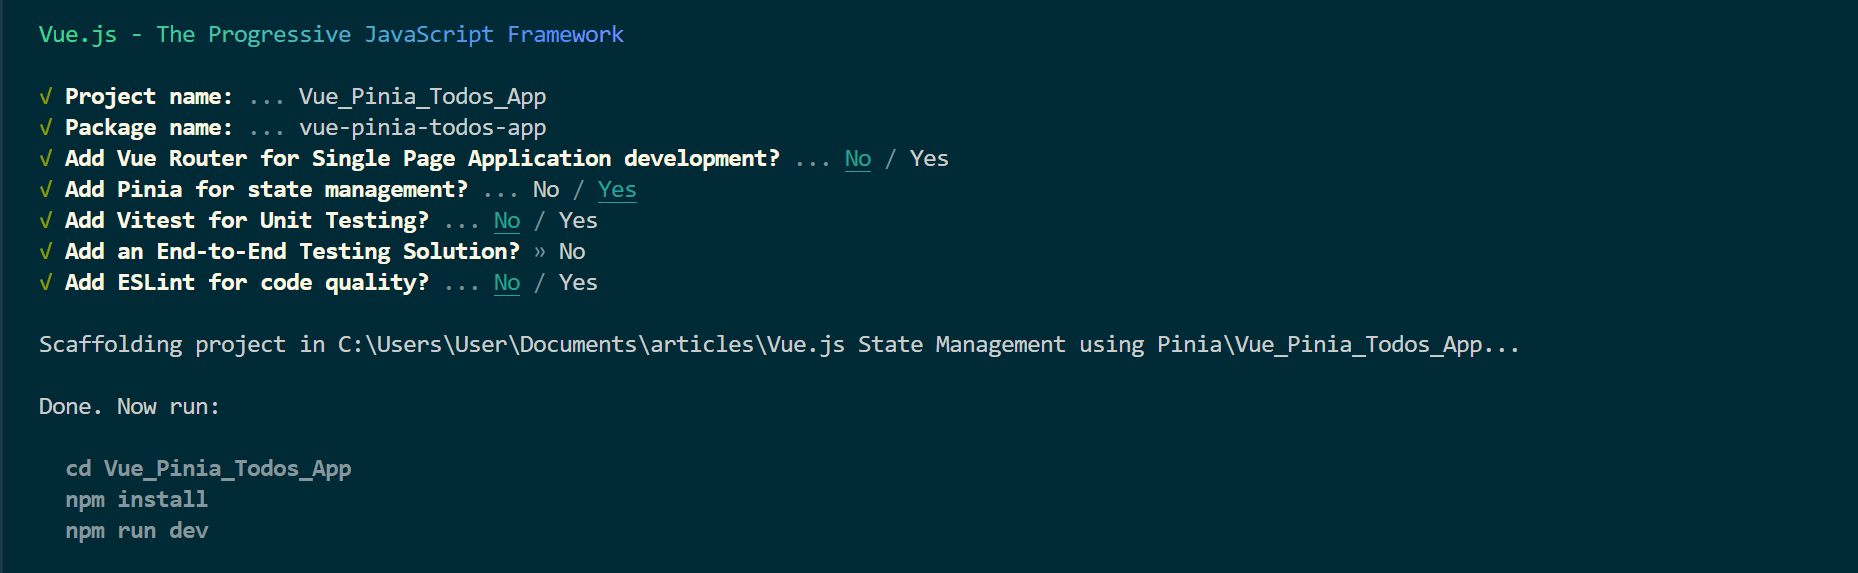 Vue.js State Management using Pinia